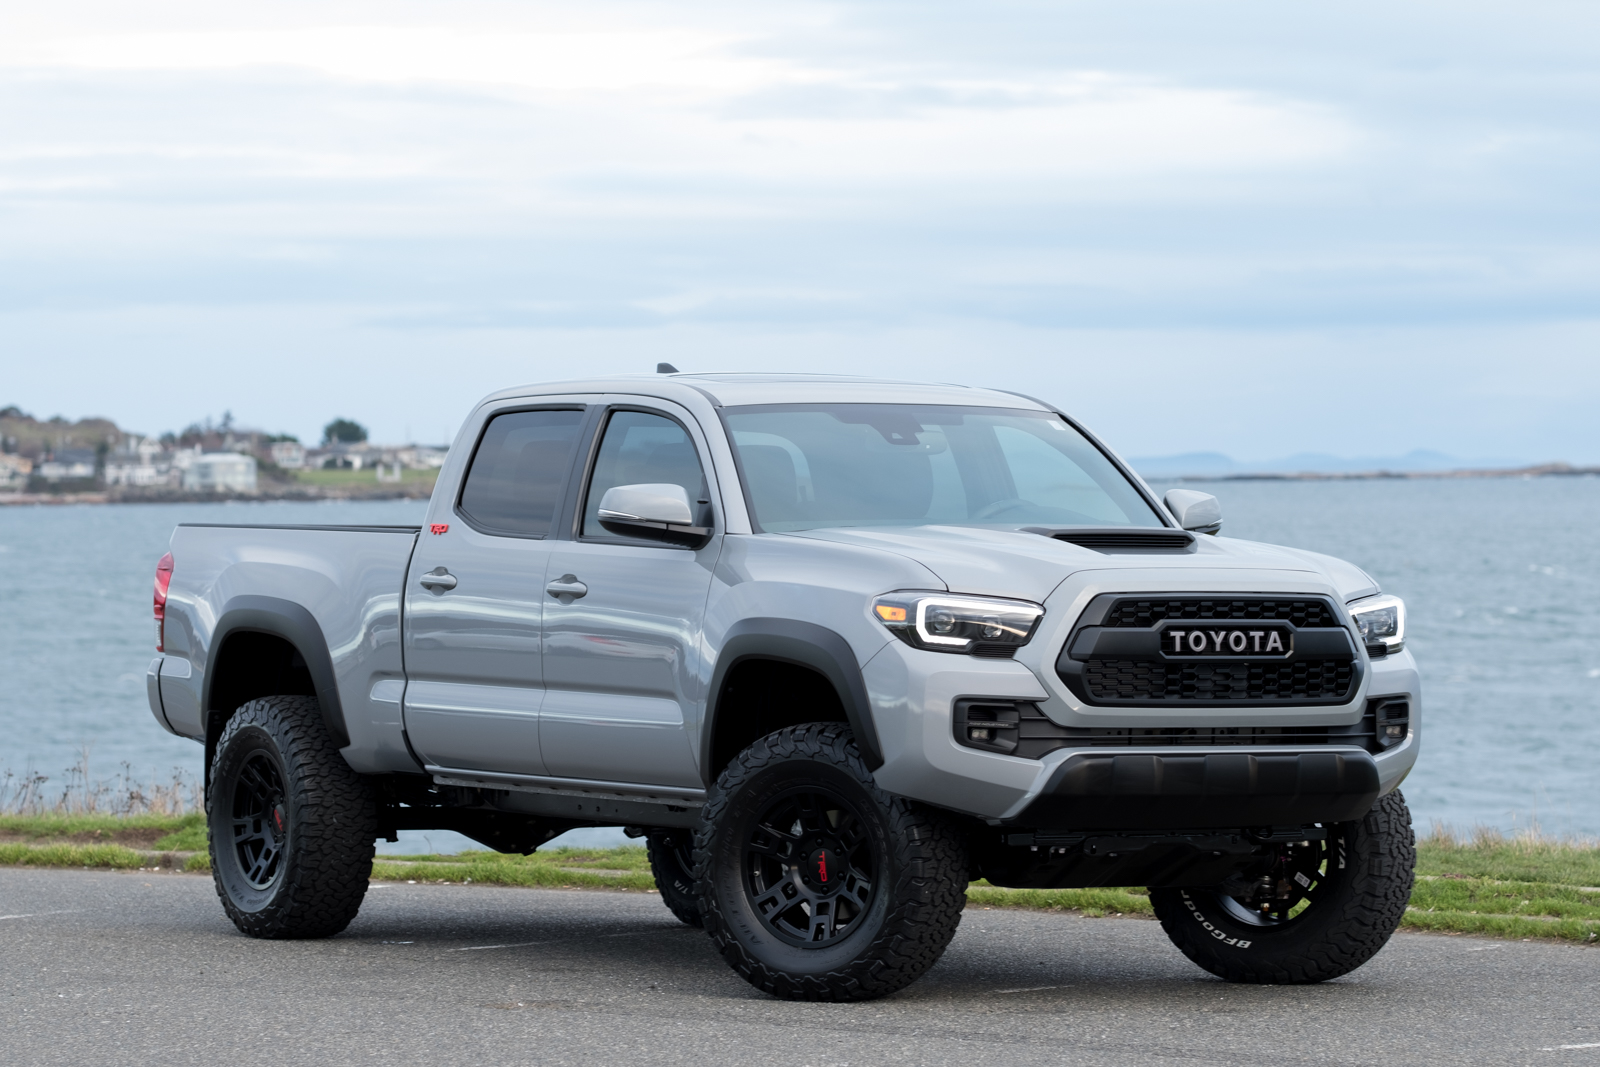 2018 Toyota Tacoma TRD Lifted Custom in Cement Grey